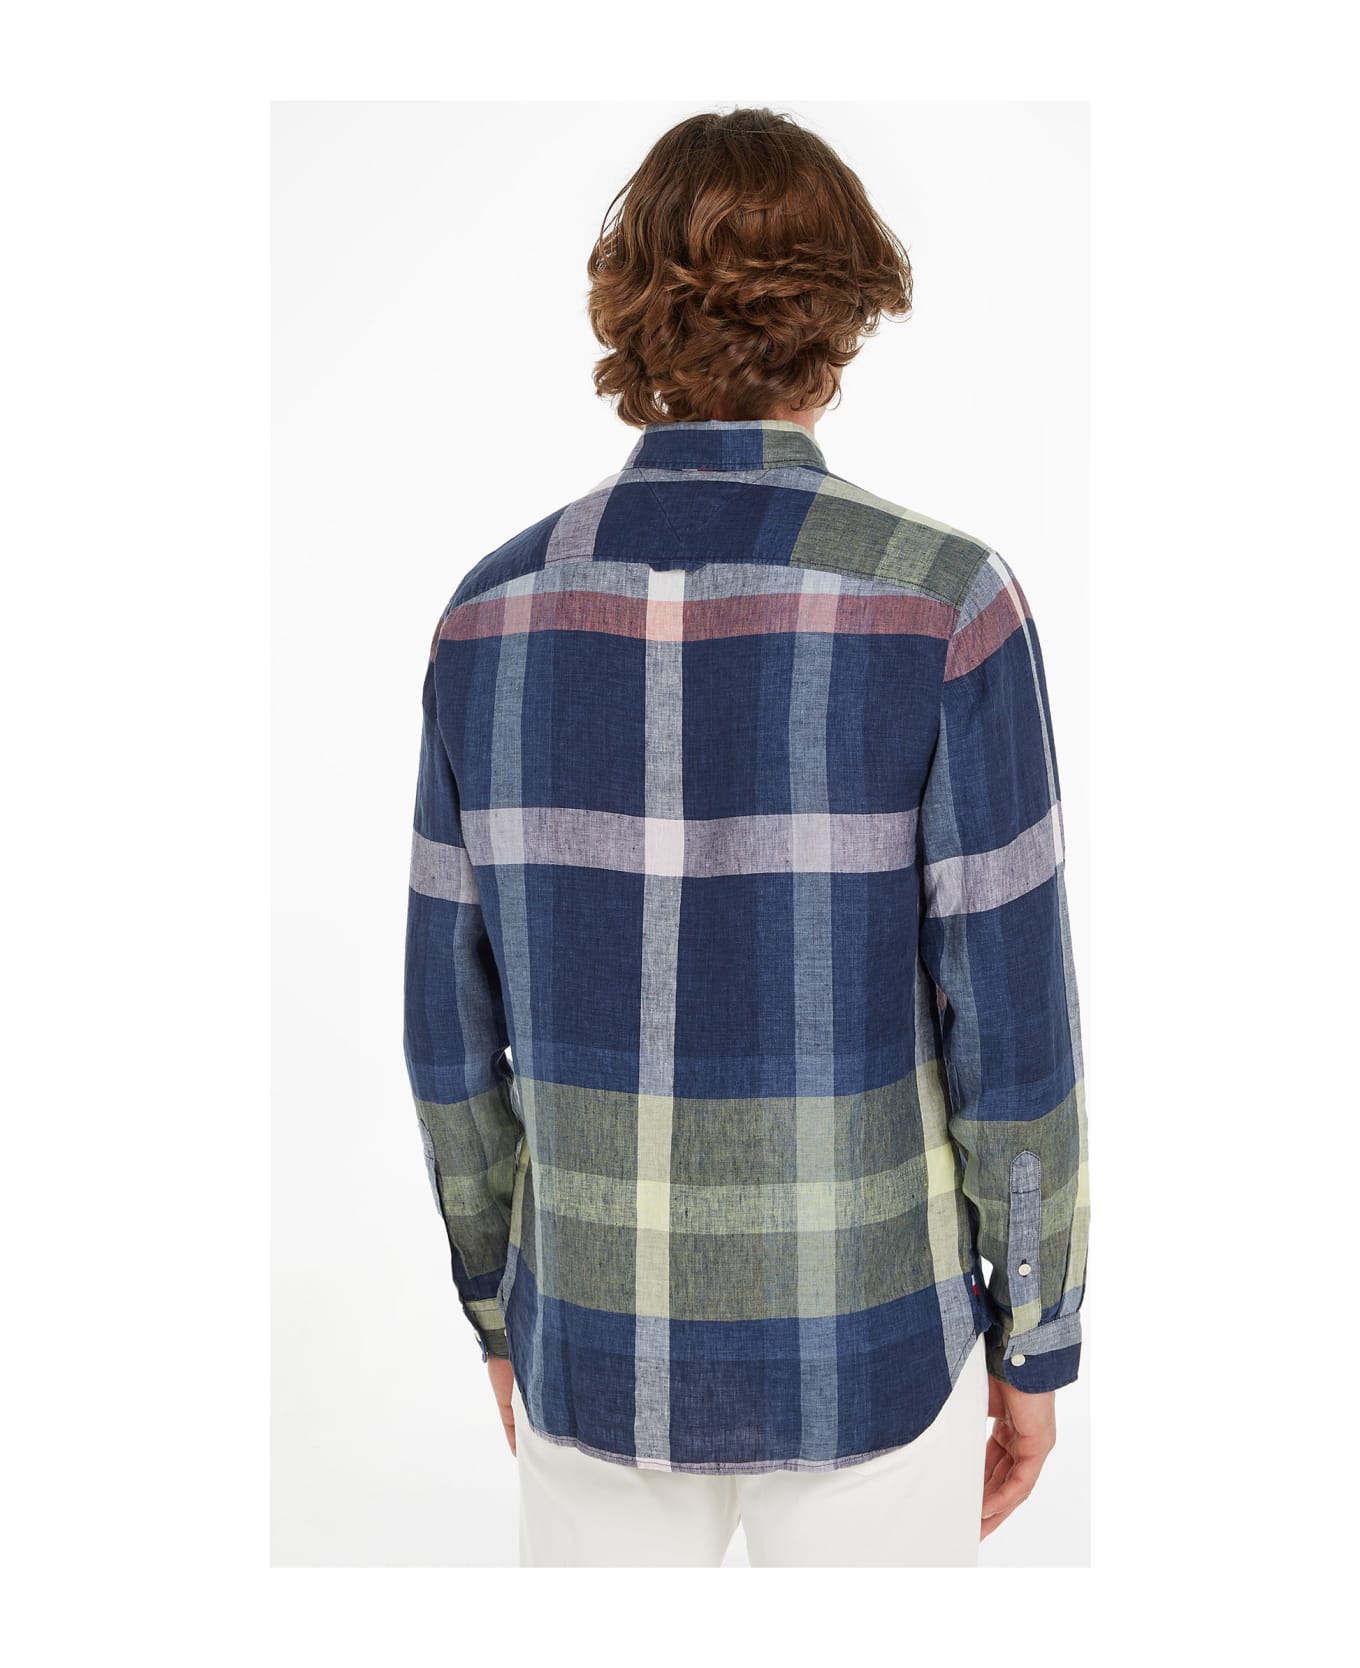 Tommy Hilfiger Multicolored Checked Shirt - CARBON NAVY/MULTI シャツ